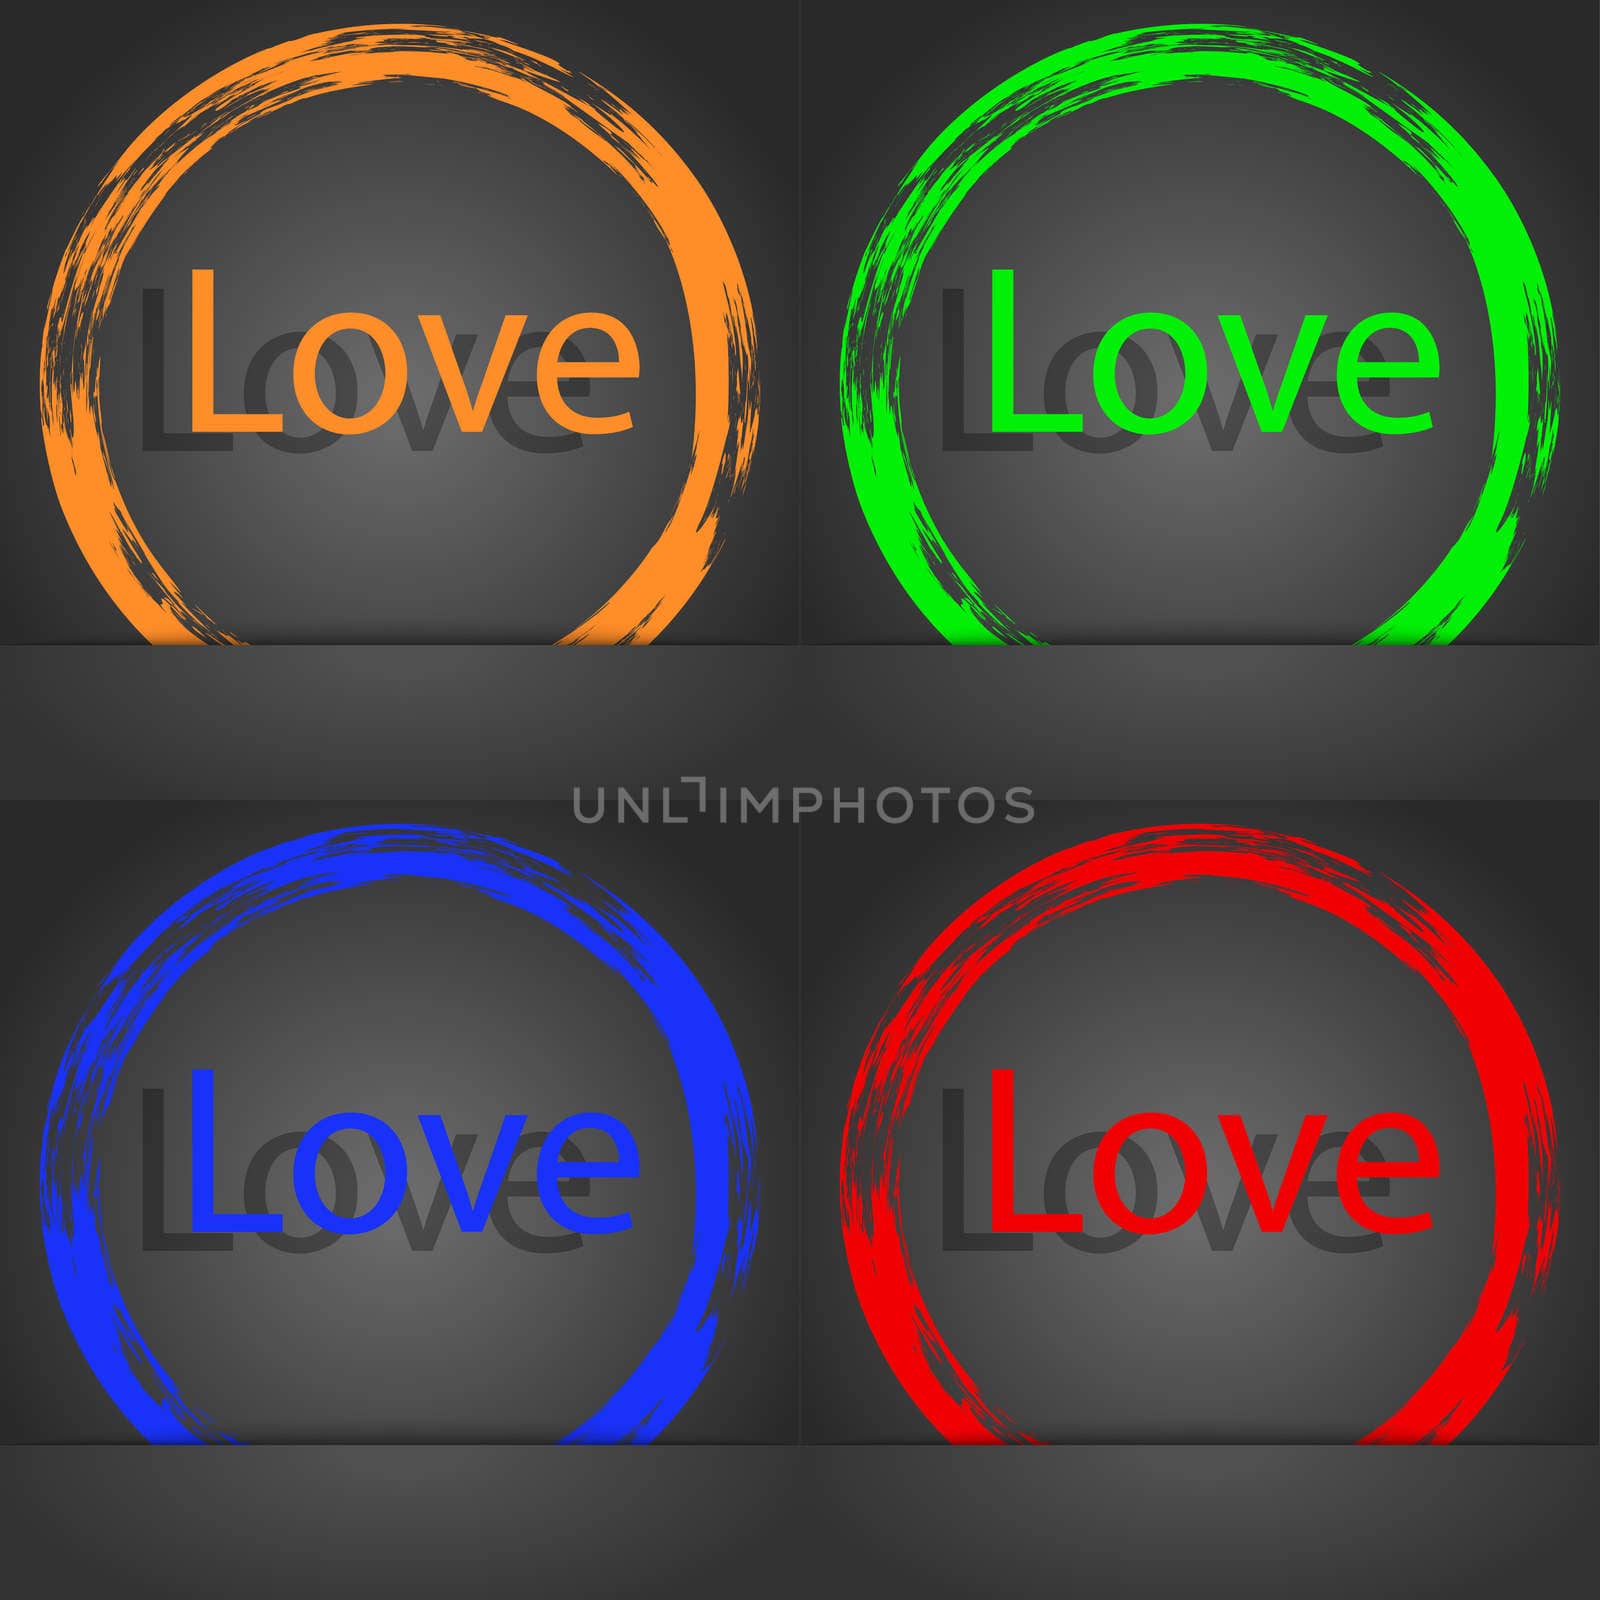 Love you sign icon. Valentines day symbol. Fashionable modern style. In the orange, green, blue, red design. illustration